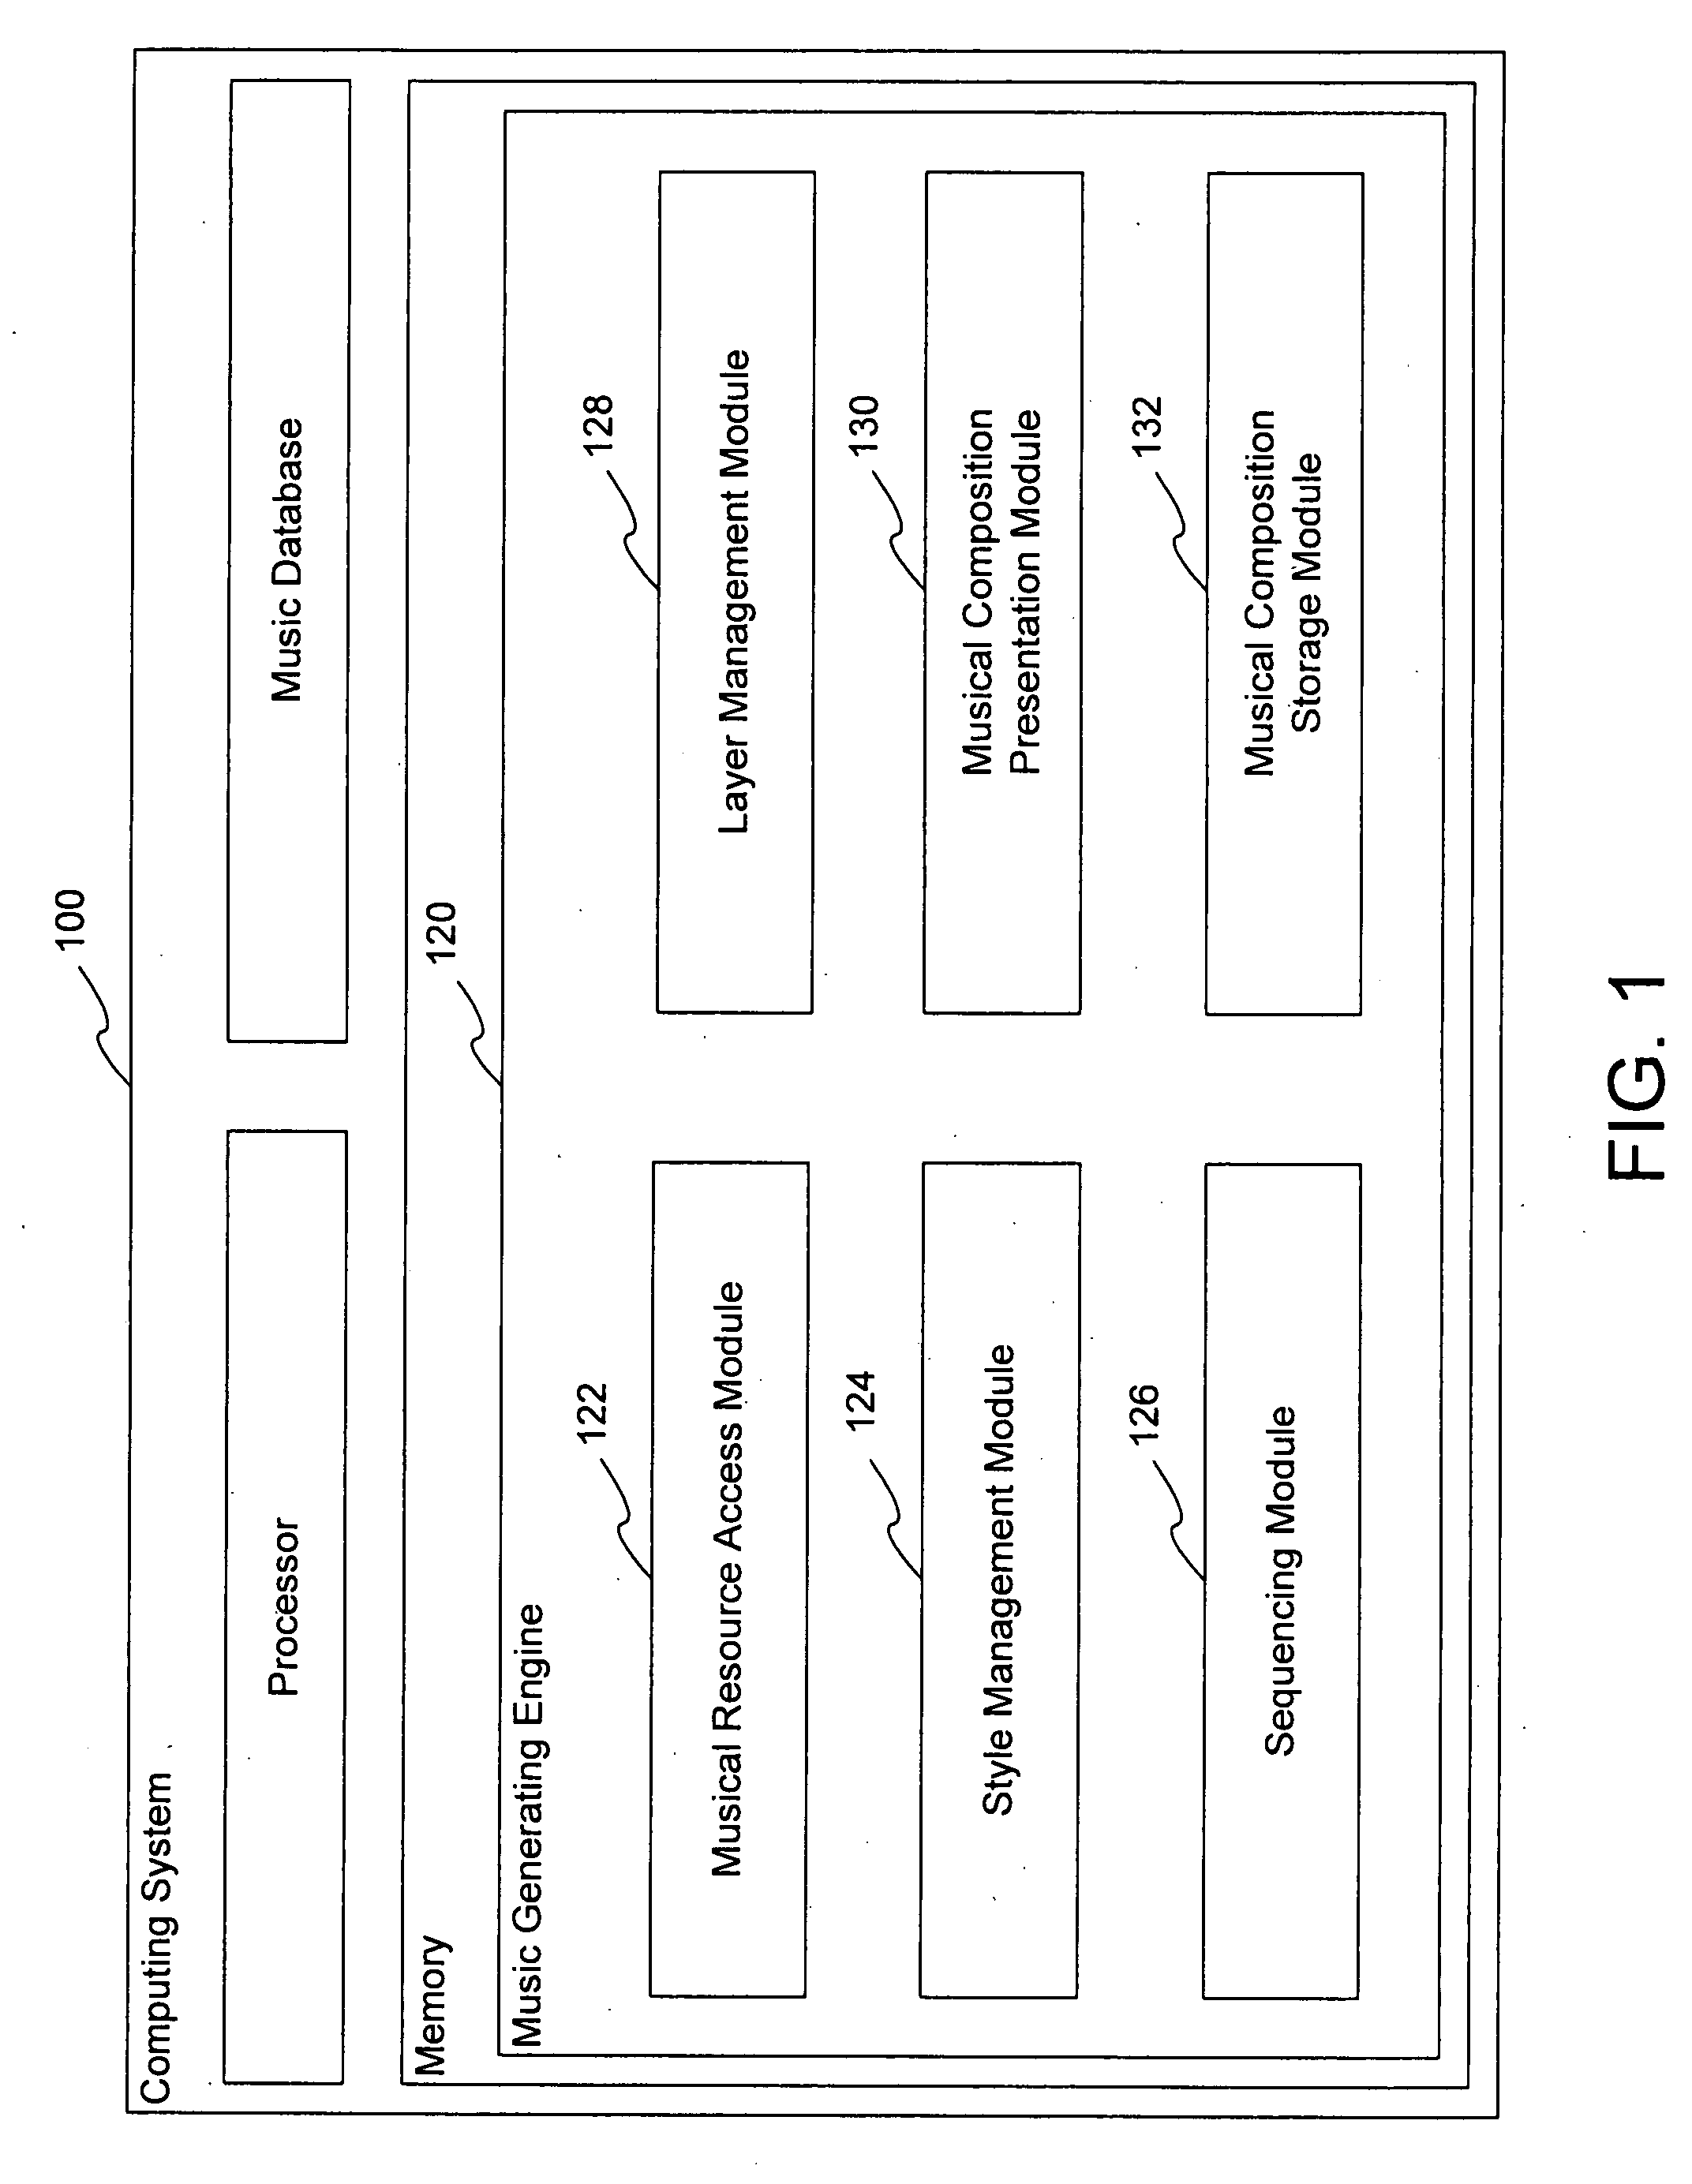 Method and apparatus for automatically creating musical compositions